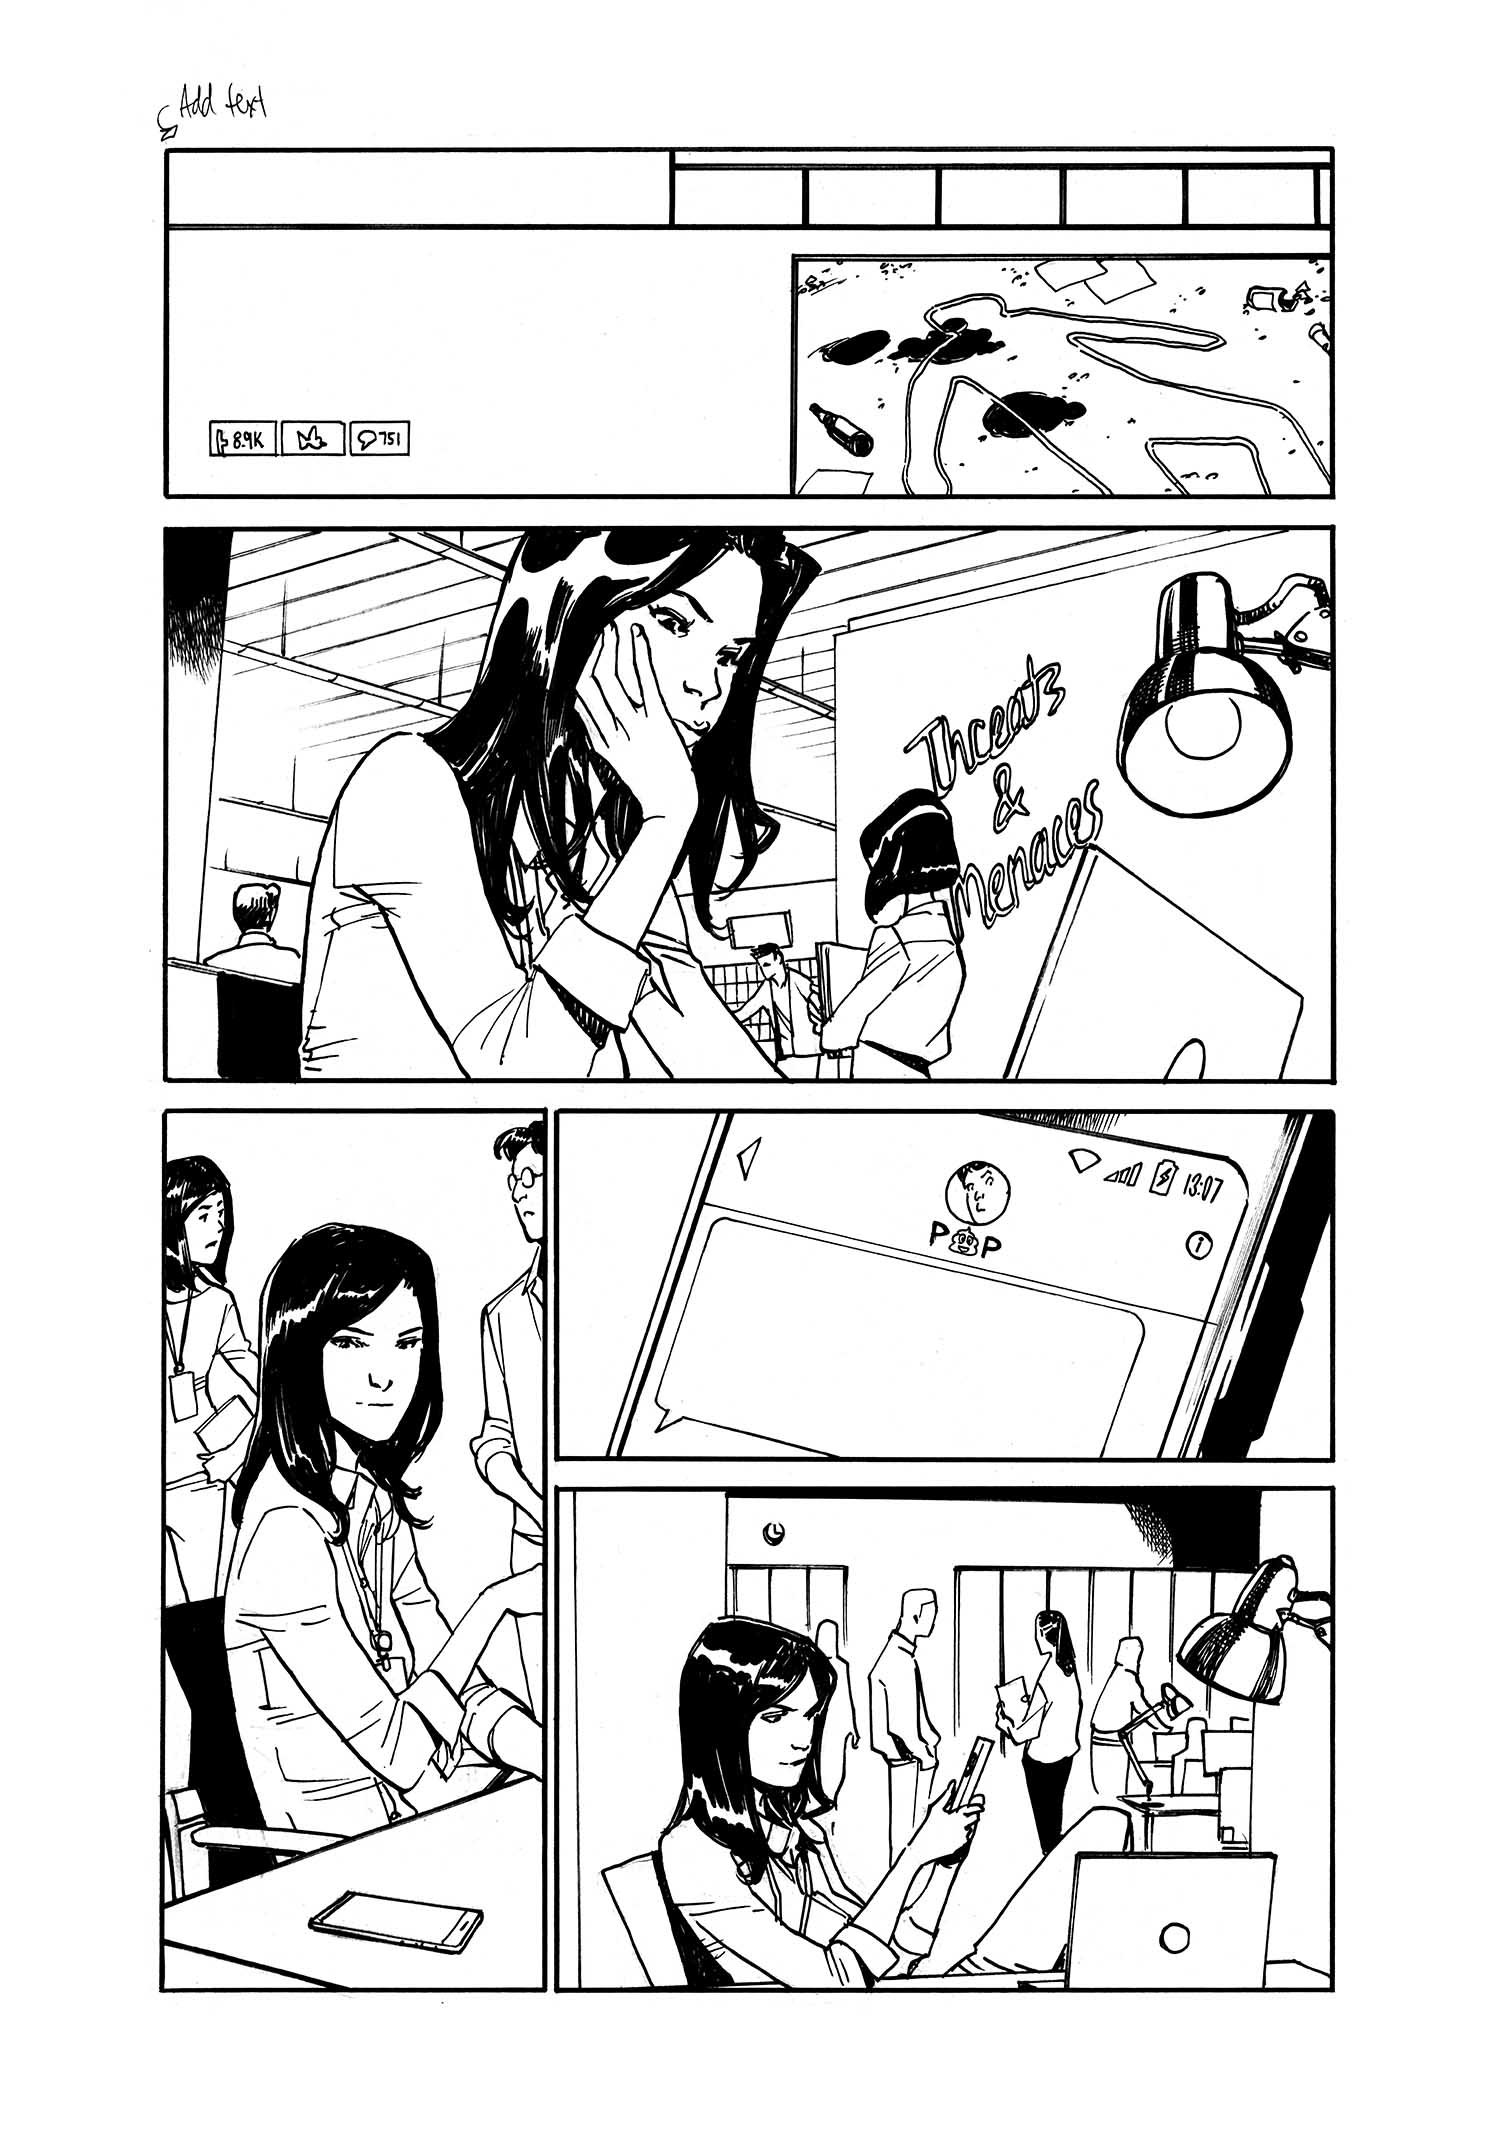 Image of Silk 2 Page 1